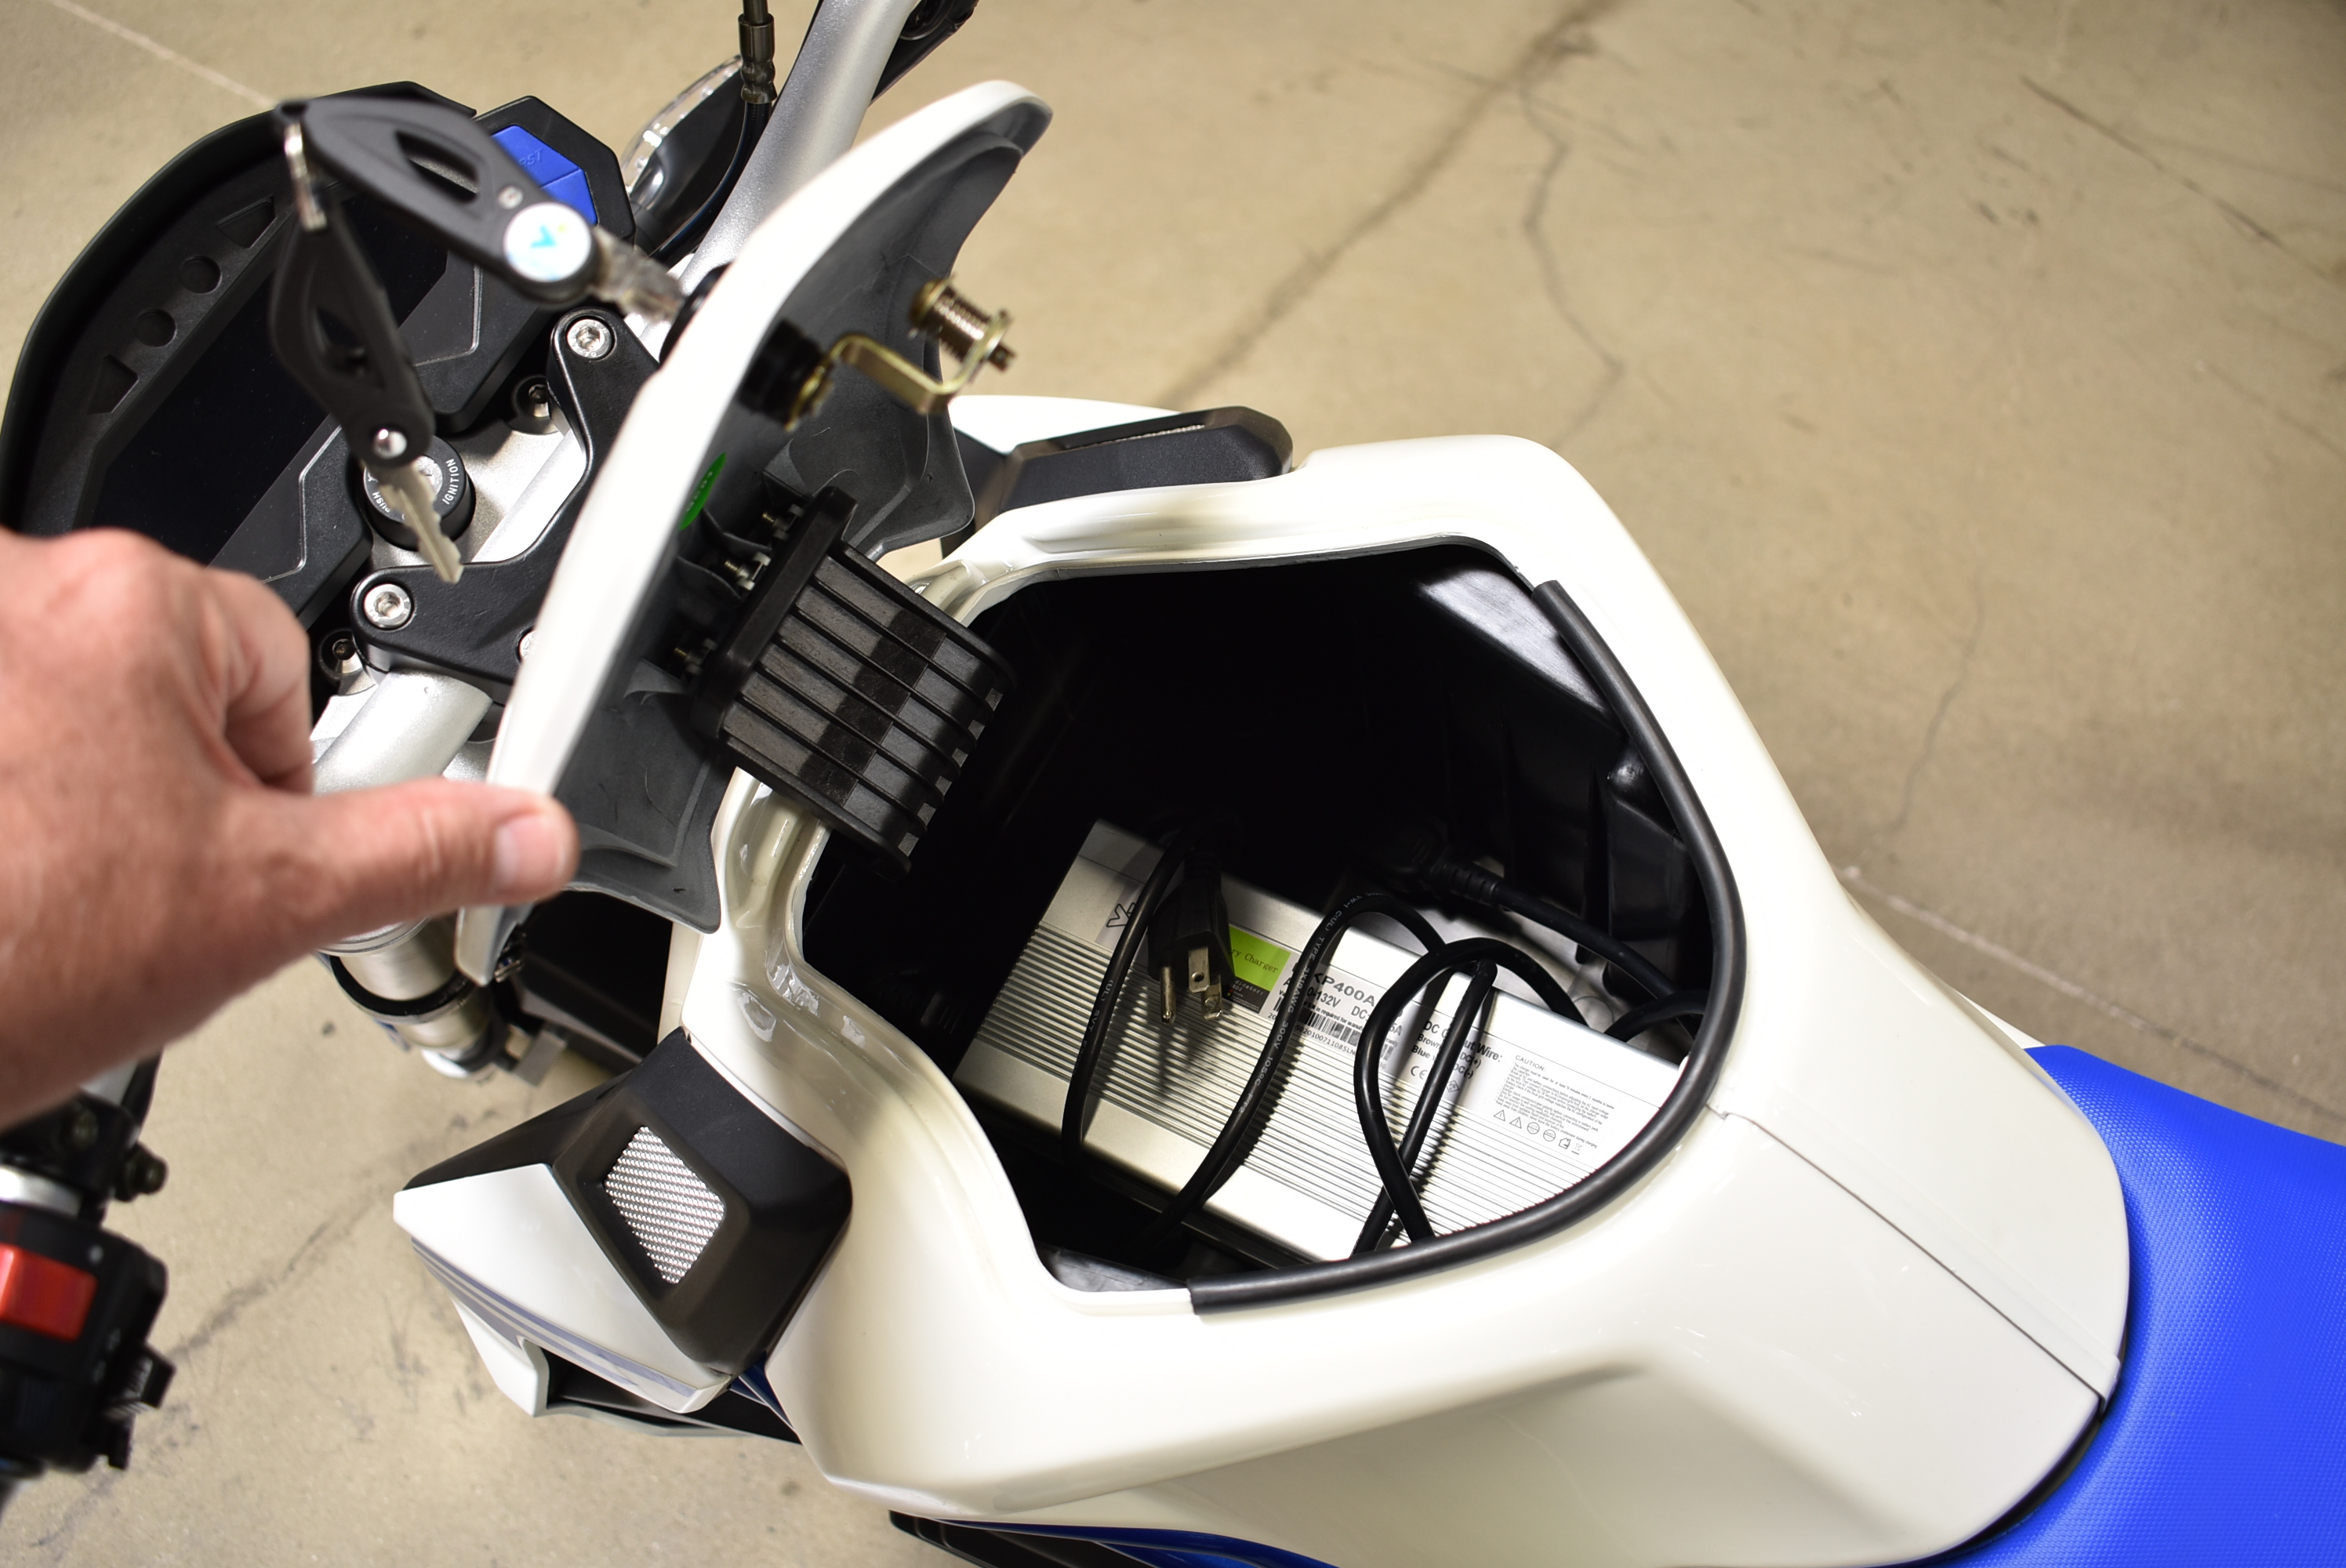 CSC City Slicker electric motorcycle